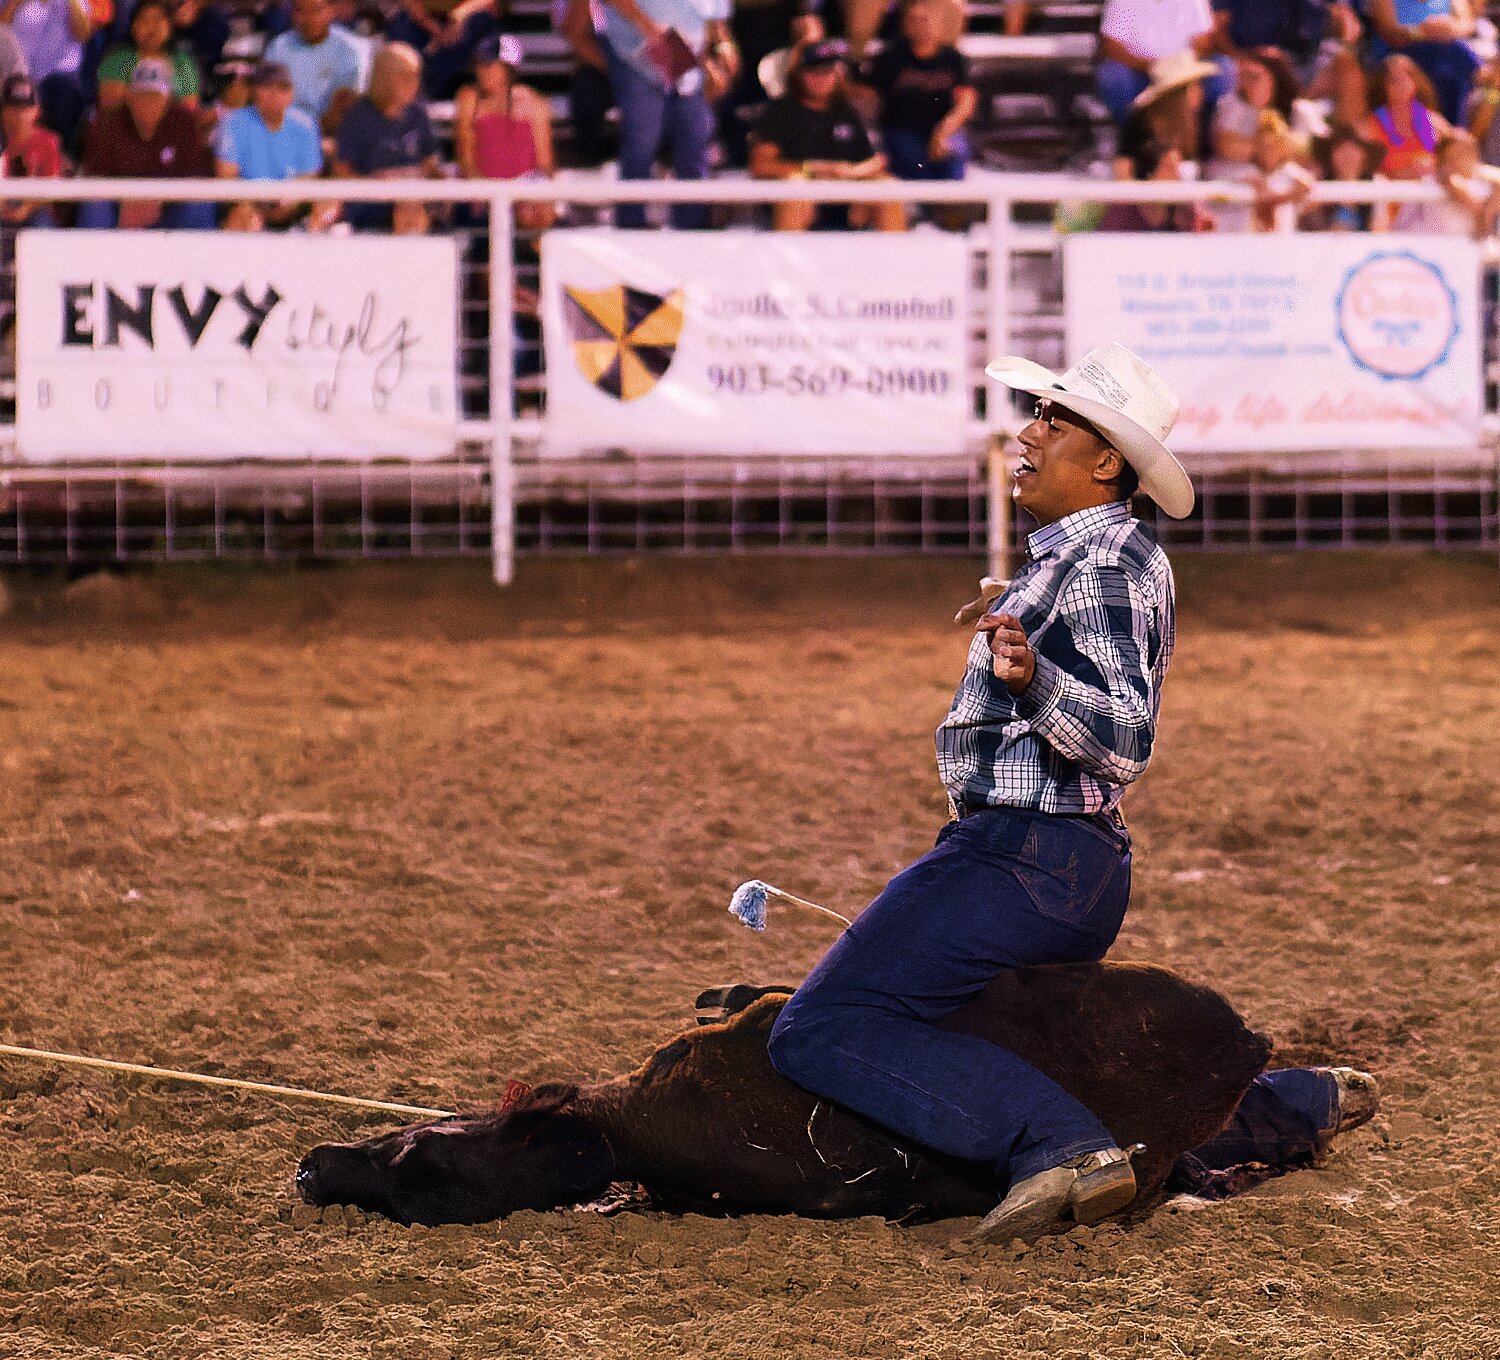 The steer wrestler let's you know they're done with a gesture and a sigh of relief. [see more sights and MFDR 2023 rodeo action]